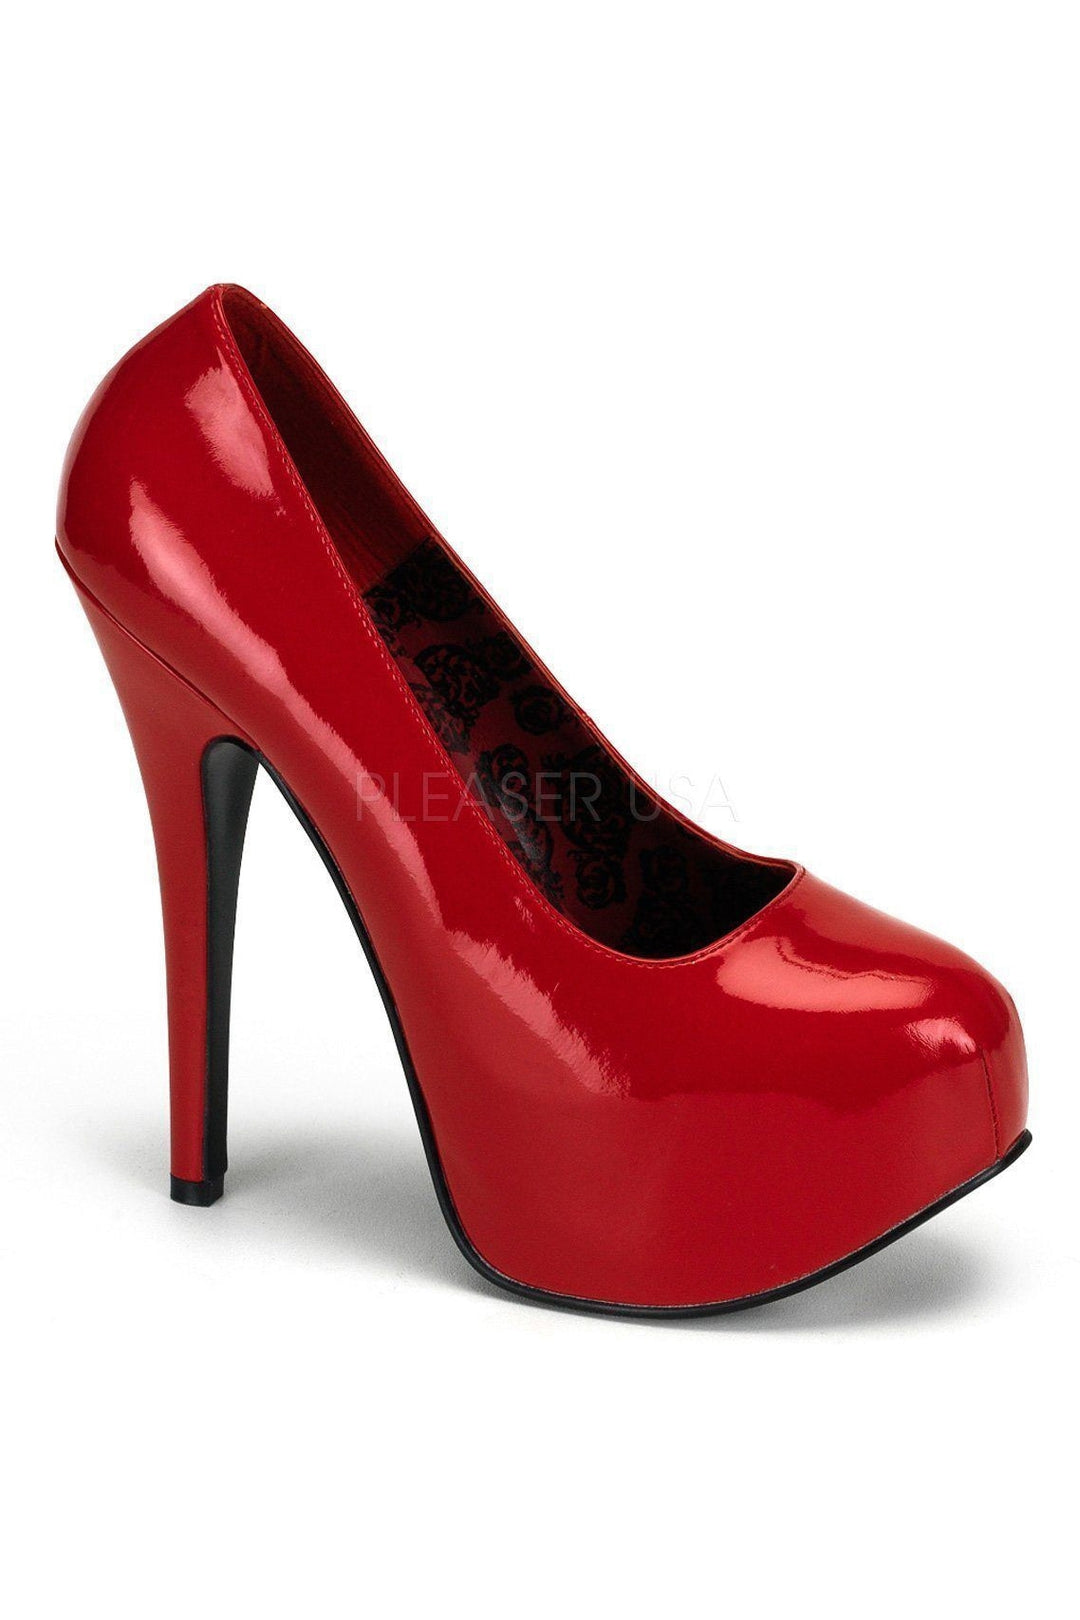 TEEZE-06W Pump | Red Patent-Pleaser Pink Label-Red-Pumps-SEXYSHOES.COM